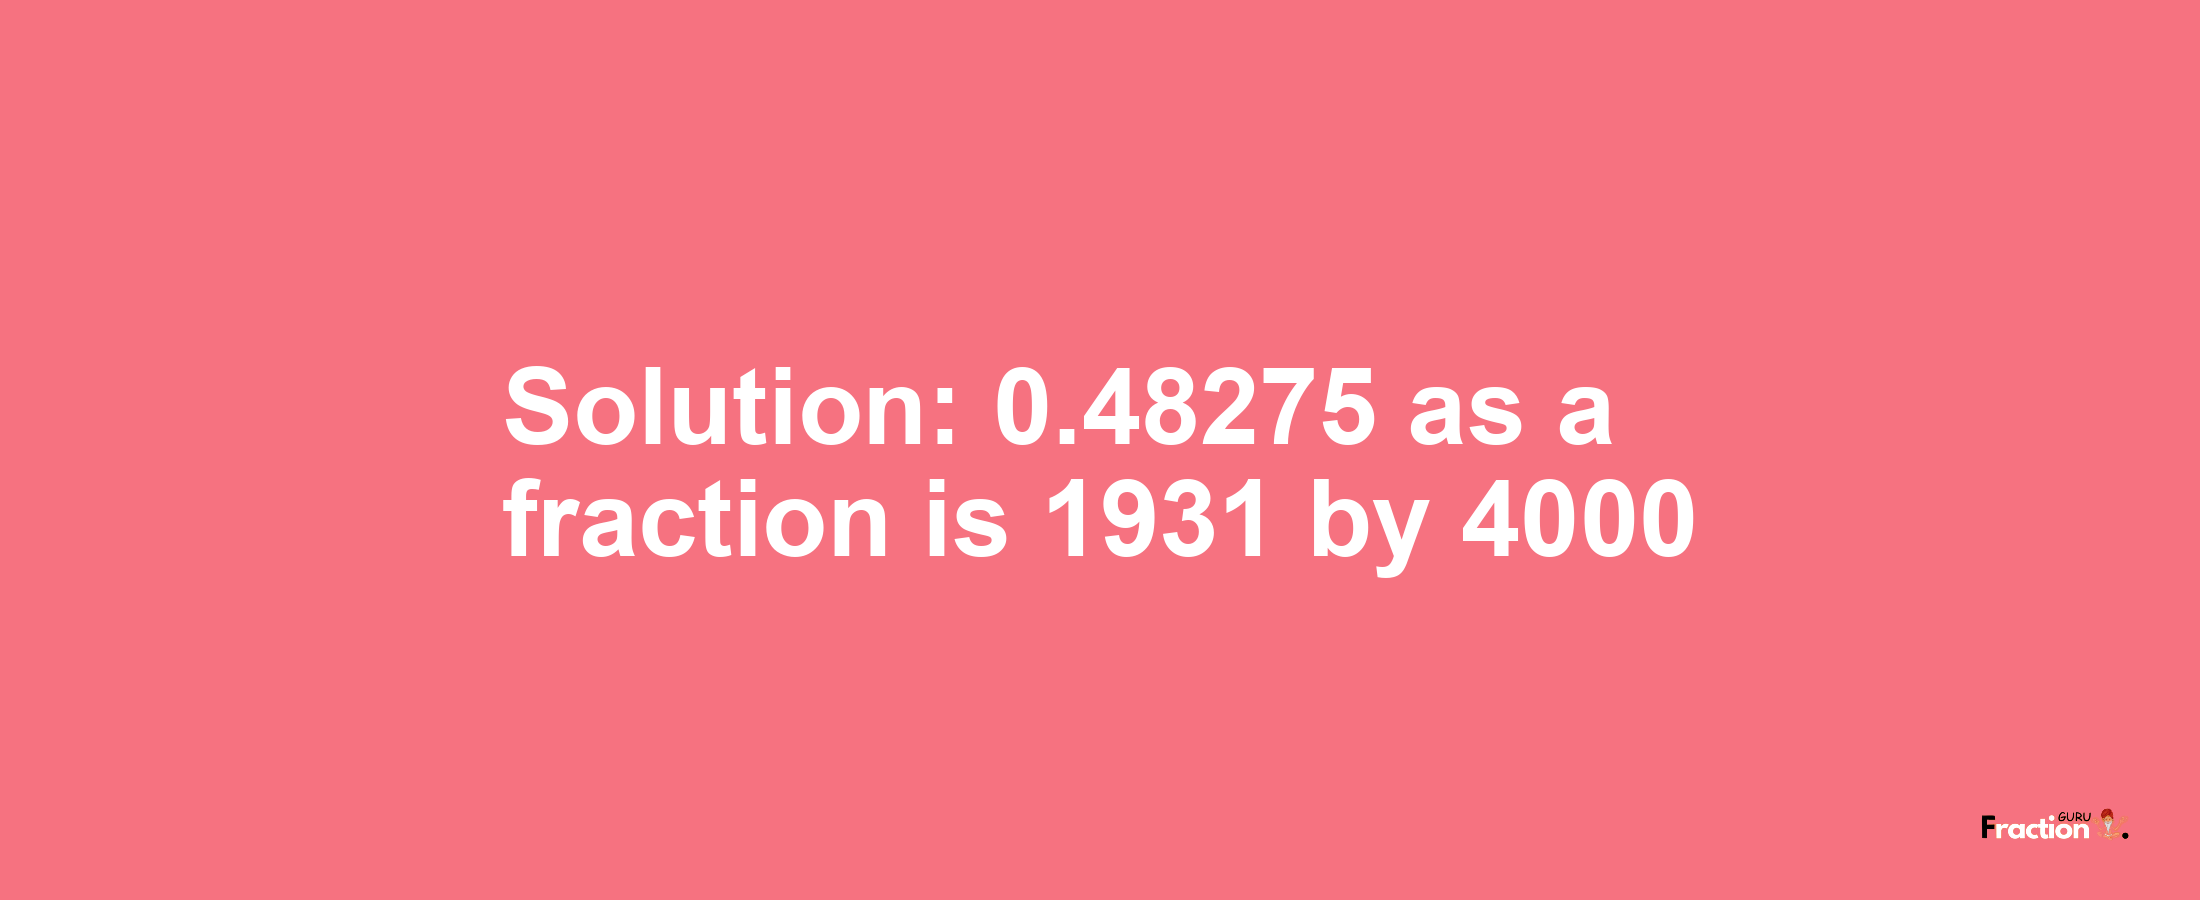 Solution:0.48275 as a fraction is 1931/4000